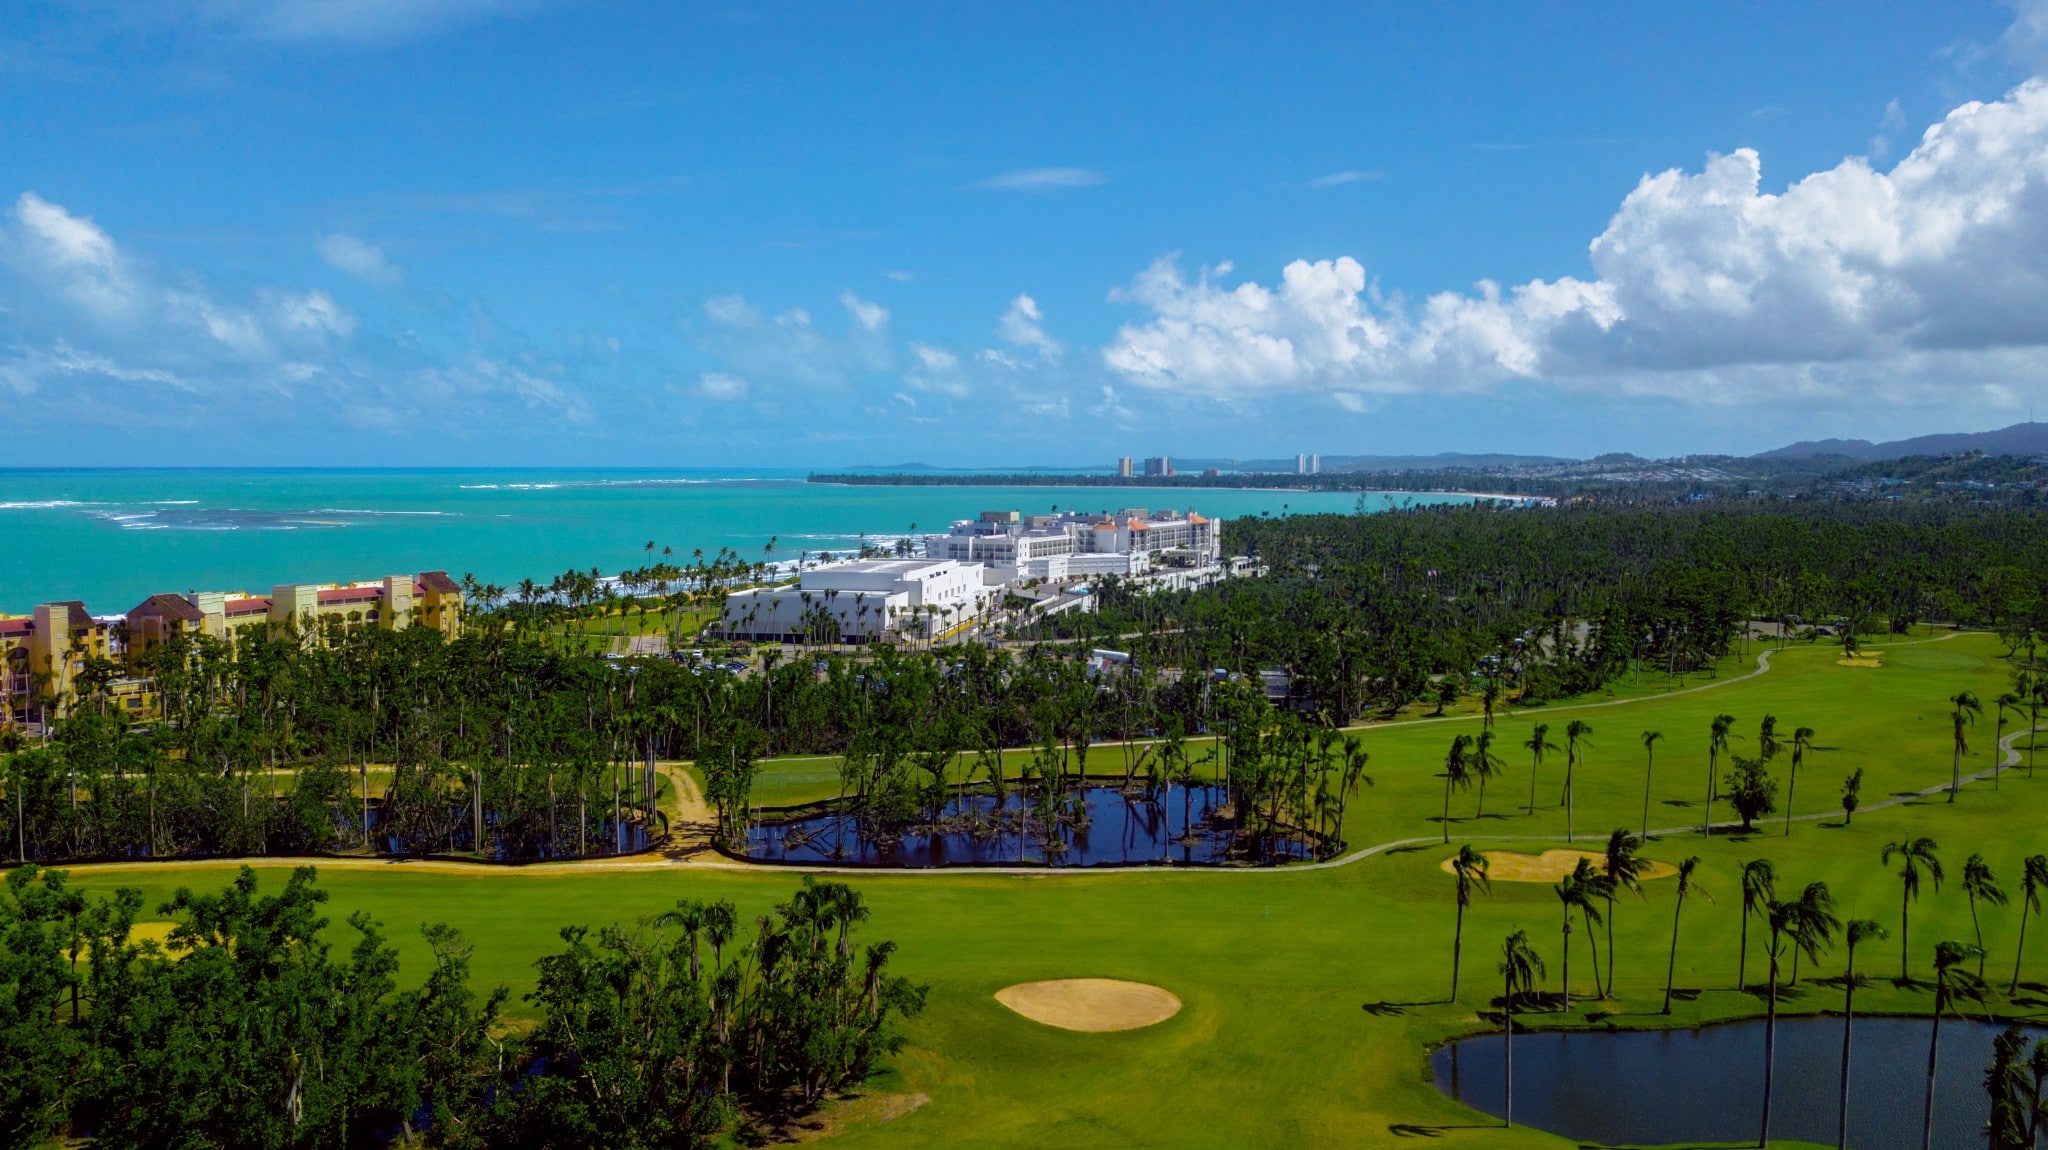 Rio Mar Country Club - Golf course - Voyages Gendron